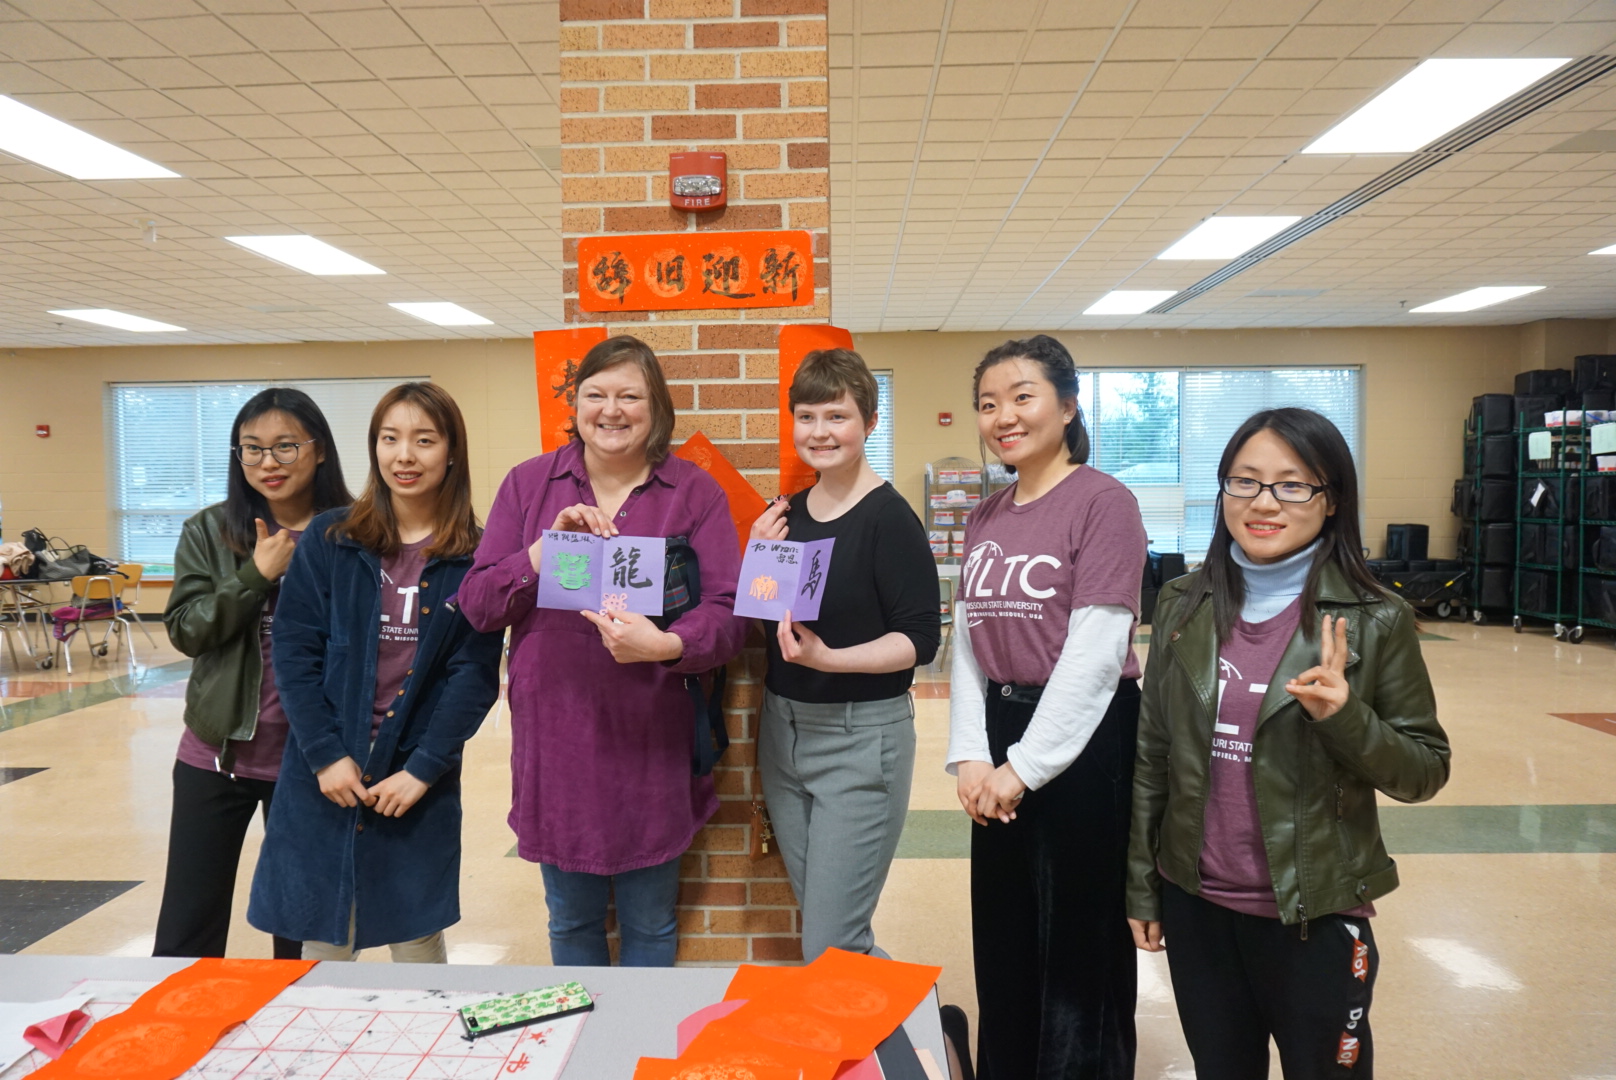 Students at Parkview High School with cultural crafts